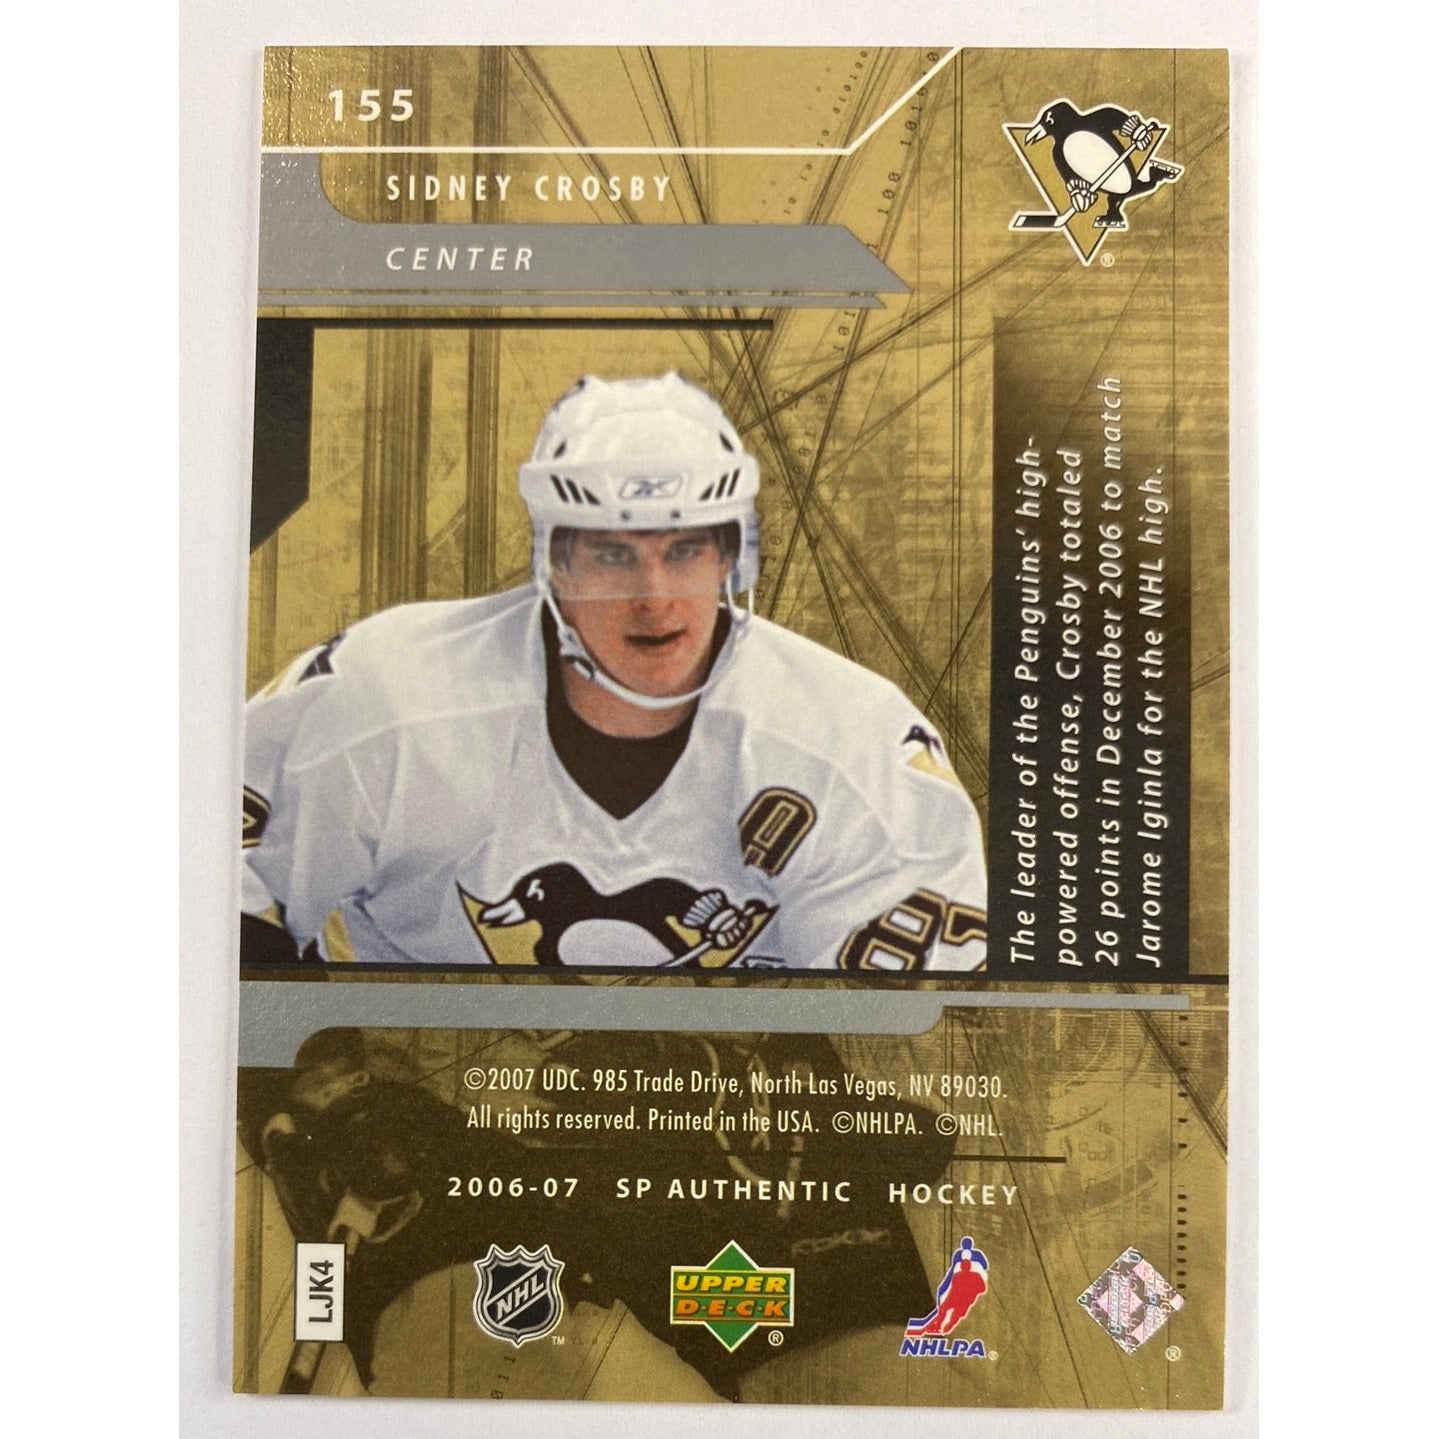 2006-07 SP Authentic Sidney Crosby SP Notables /999